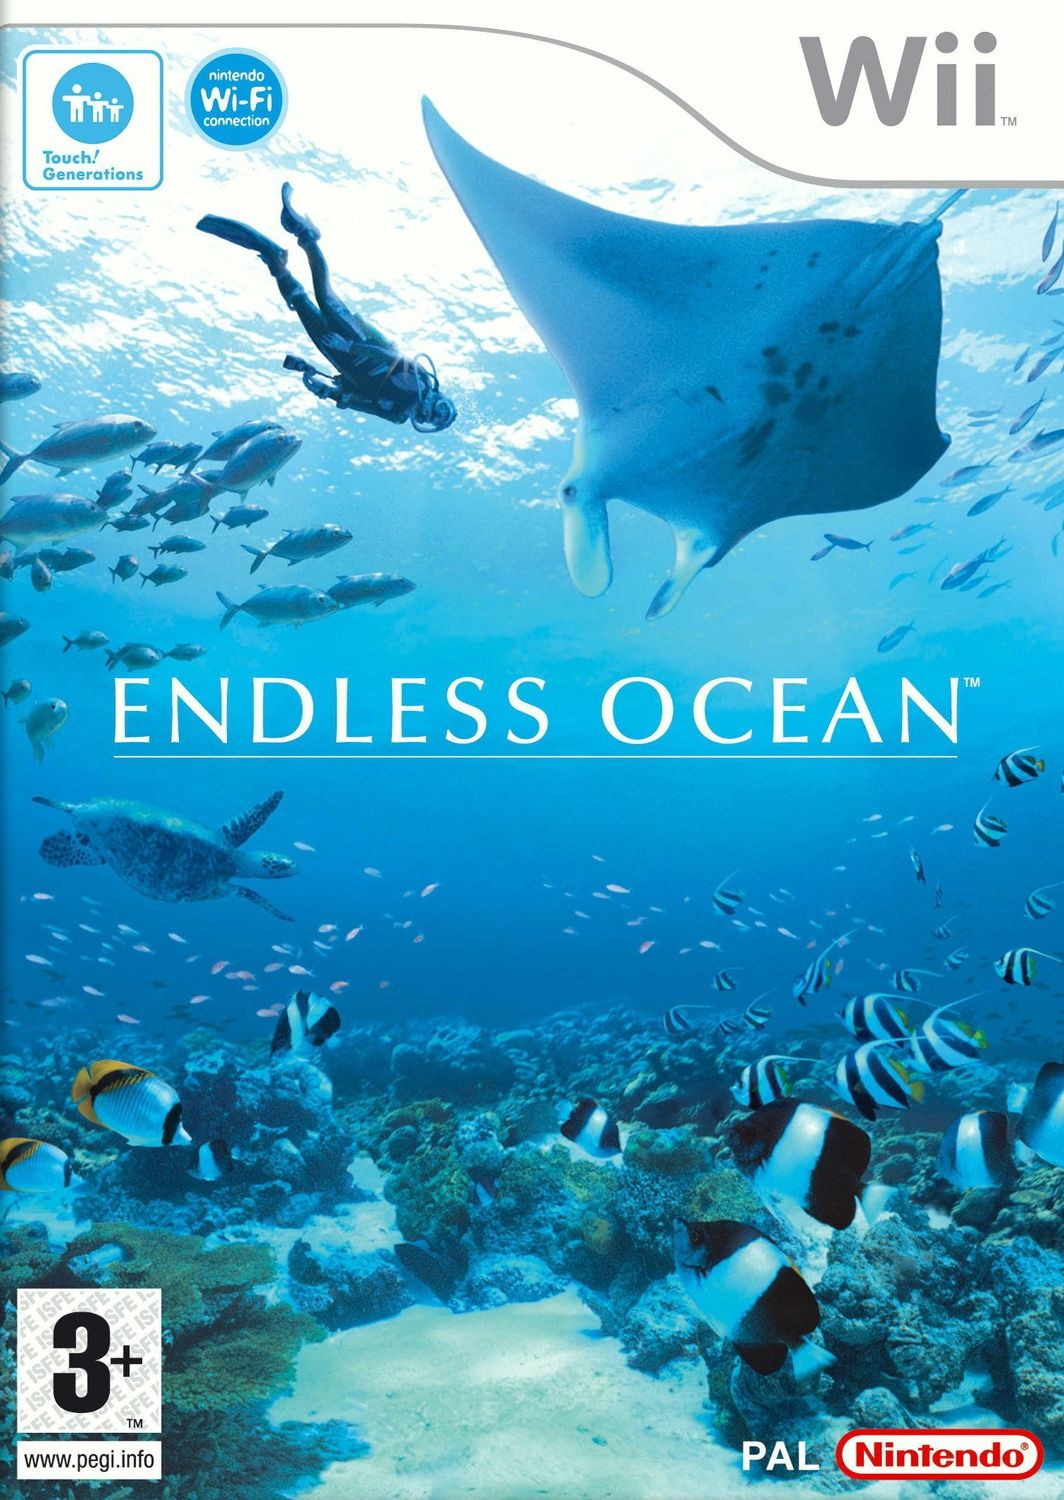 Endless Ocean (Wii)(Pwned) | Buy from Pwned Games with confidence ...